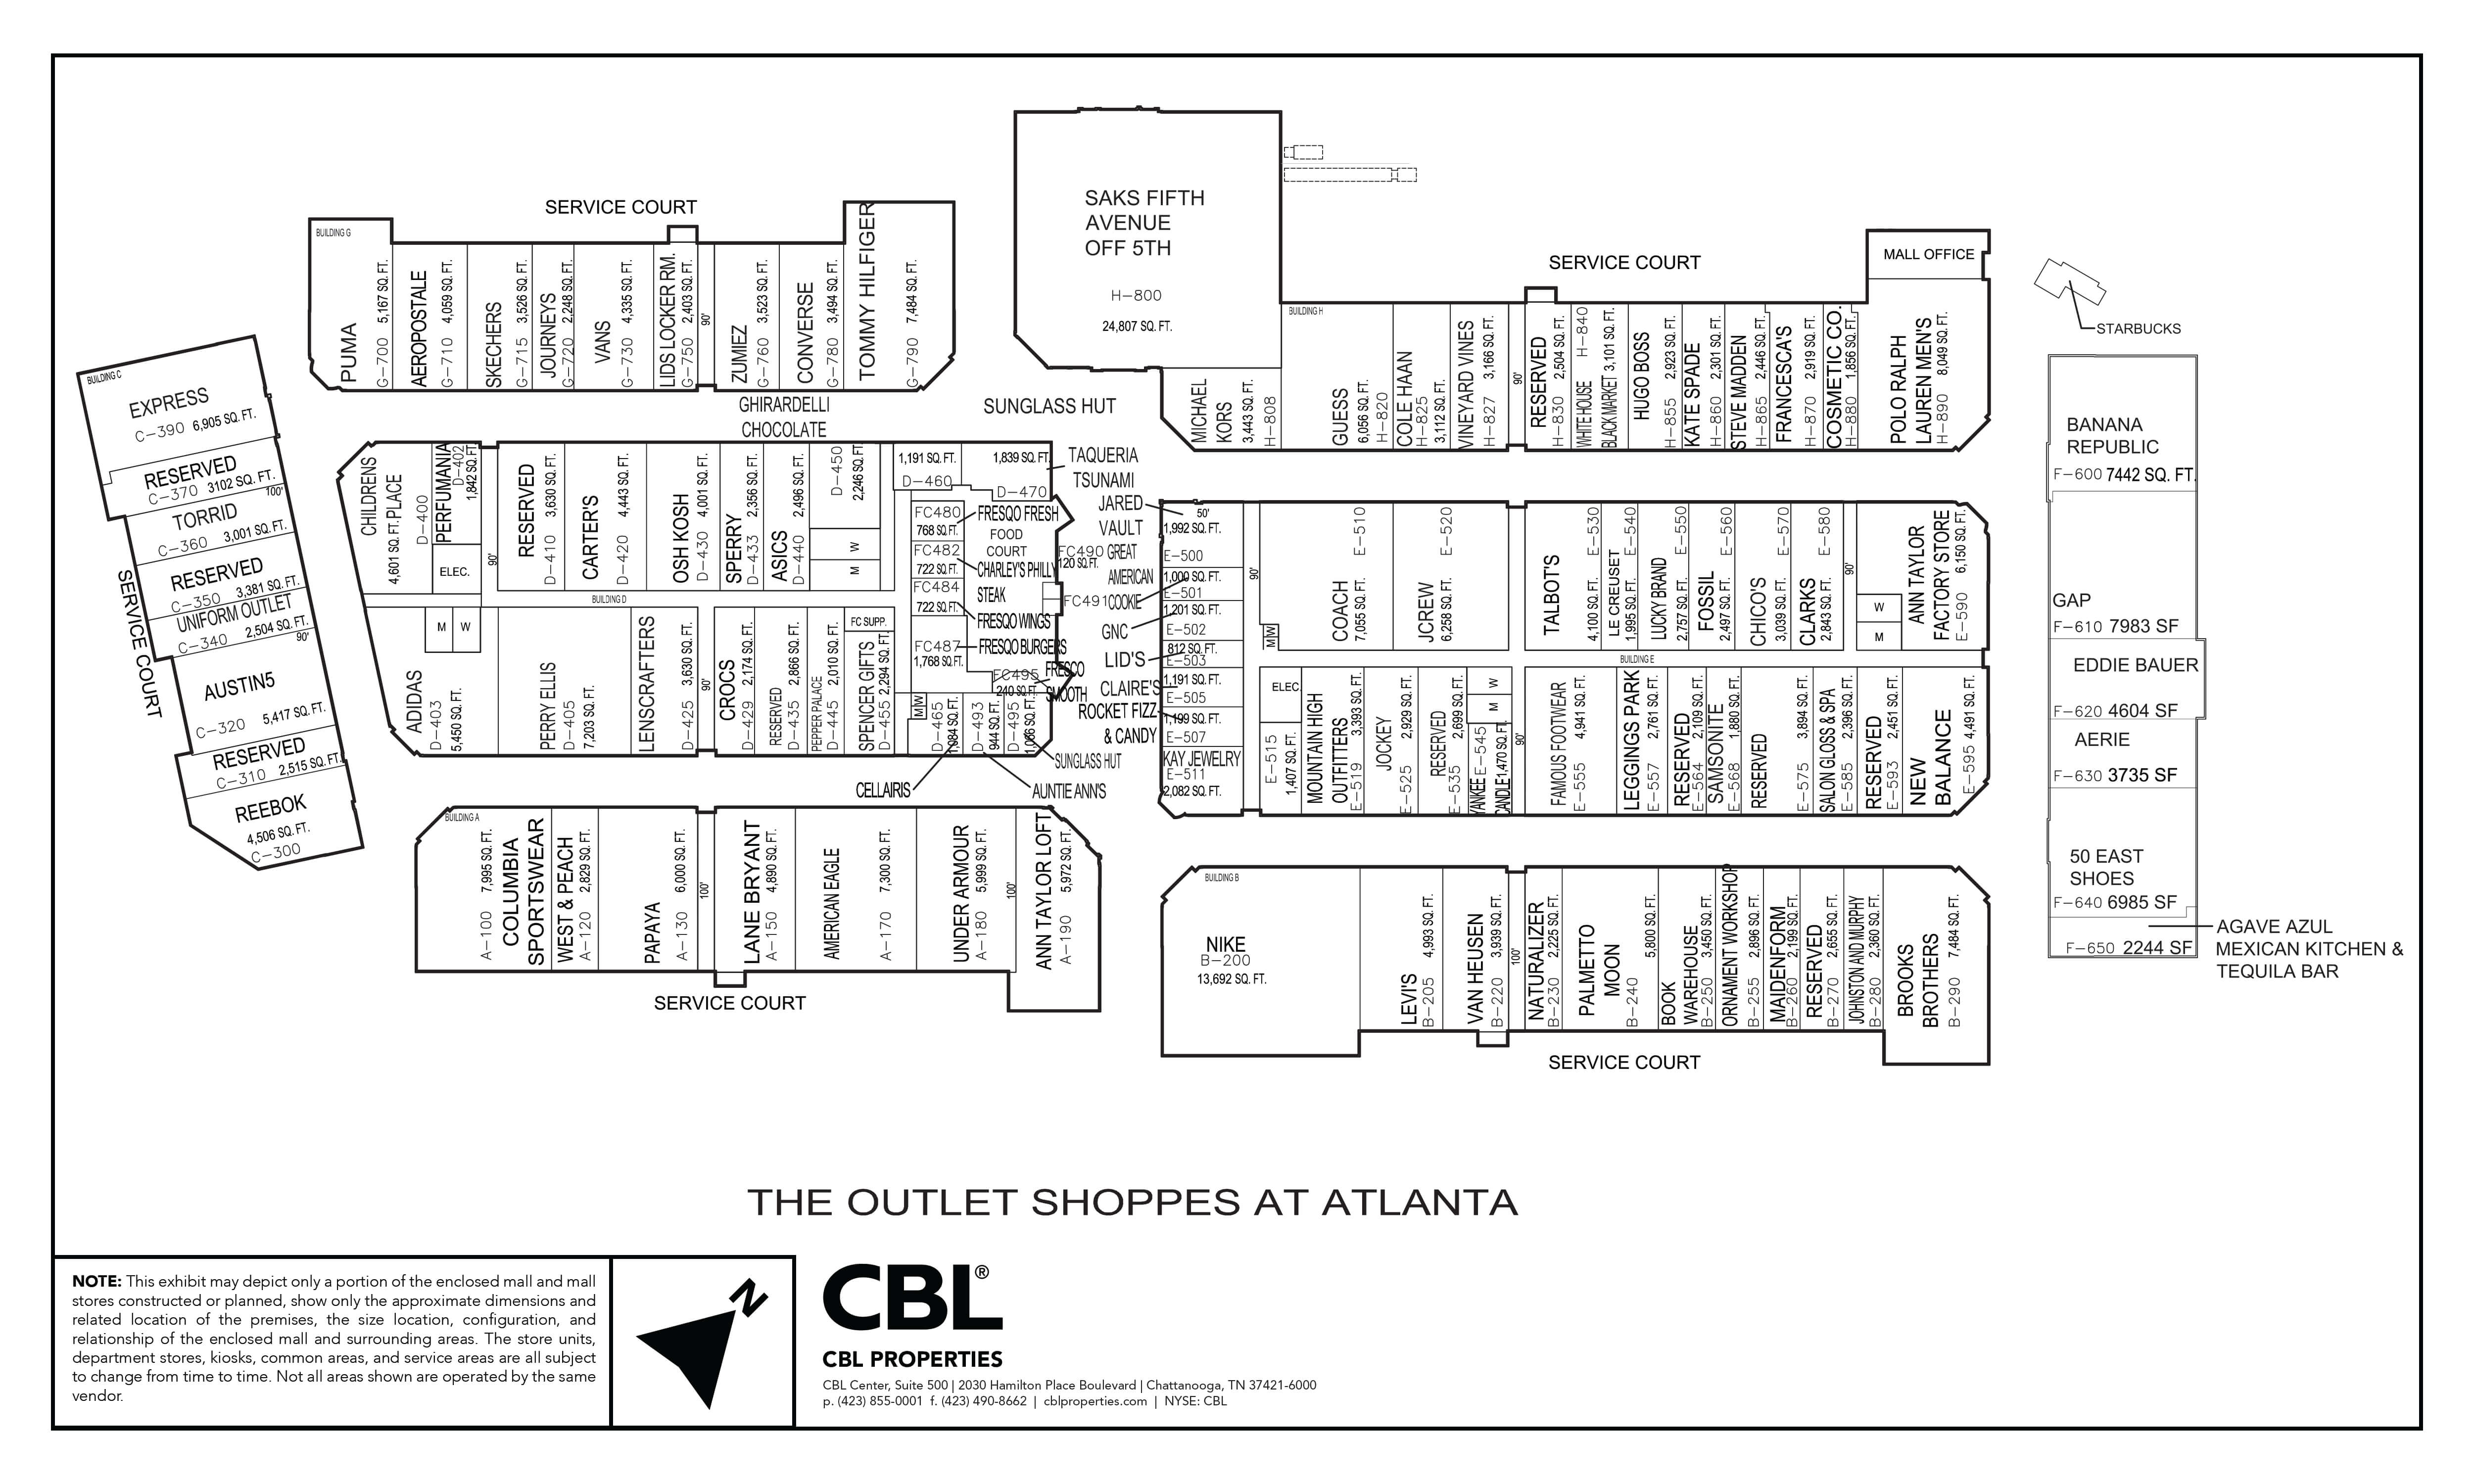 The Outlet Shoppes at Atlanta | CBL Properties